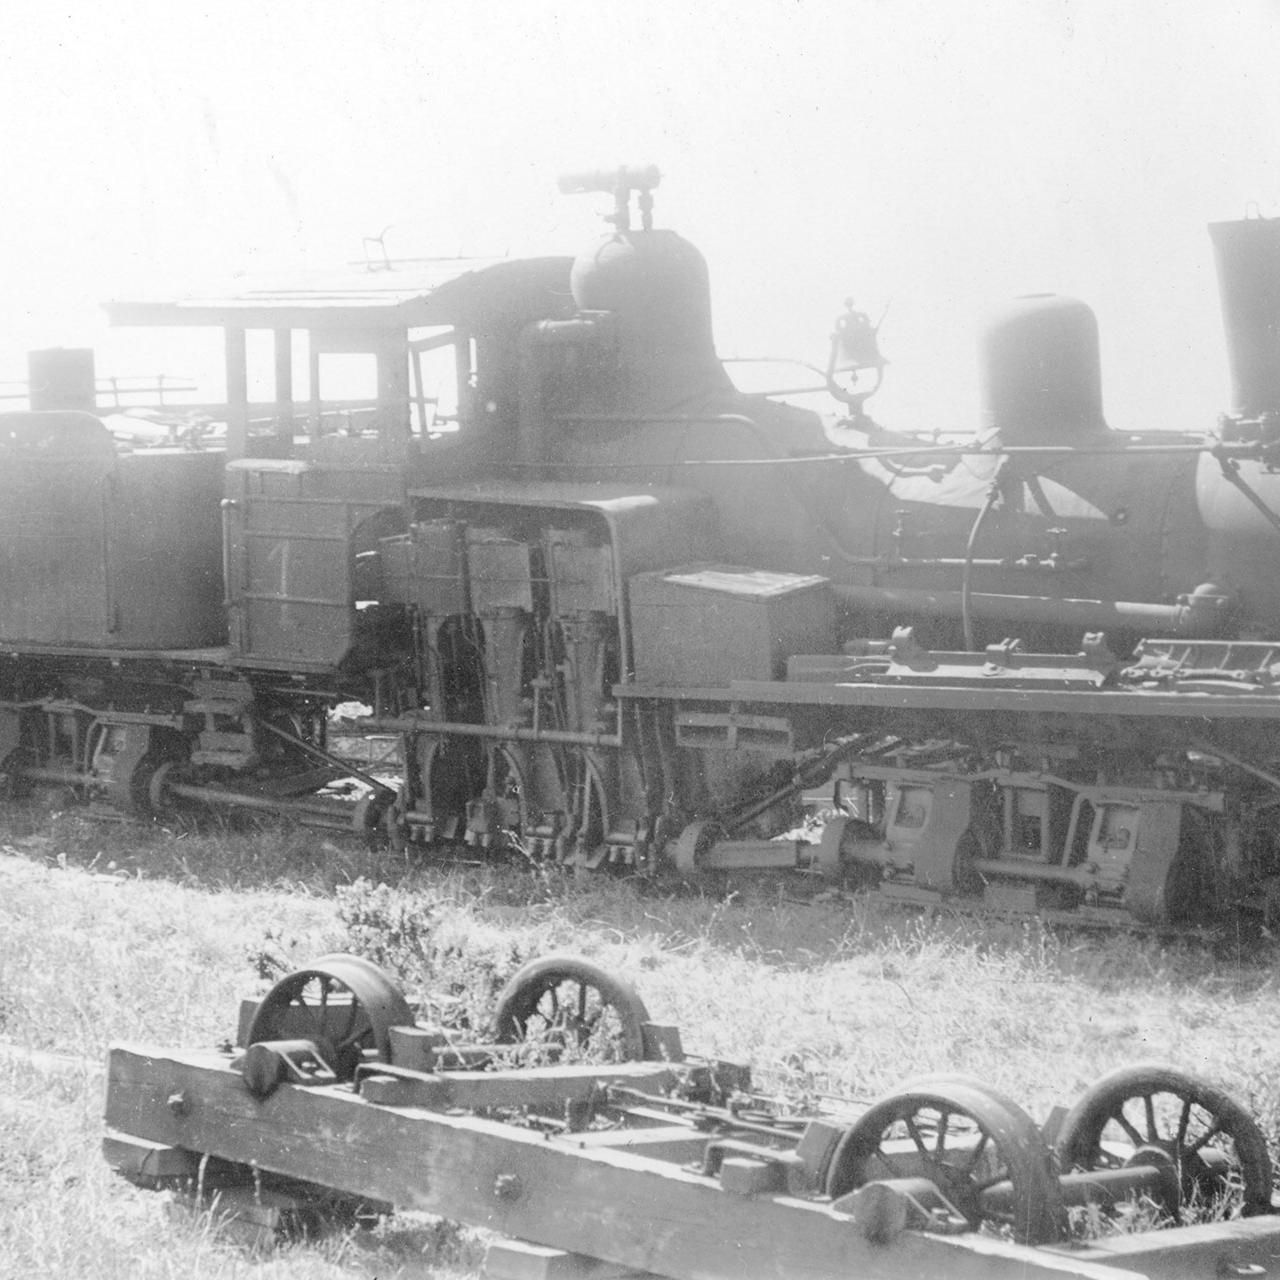 Shay #5 (former #1) out of service in Elk. June 20, 1940.